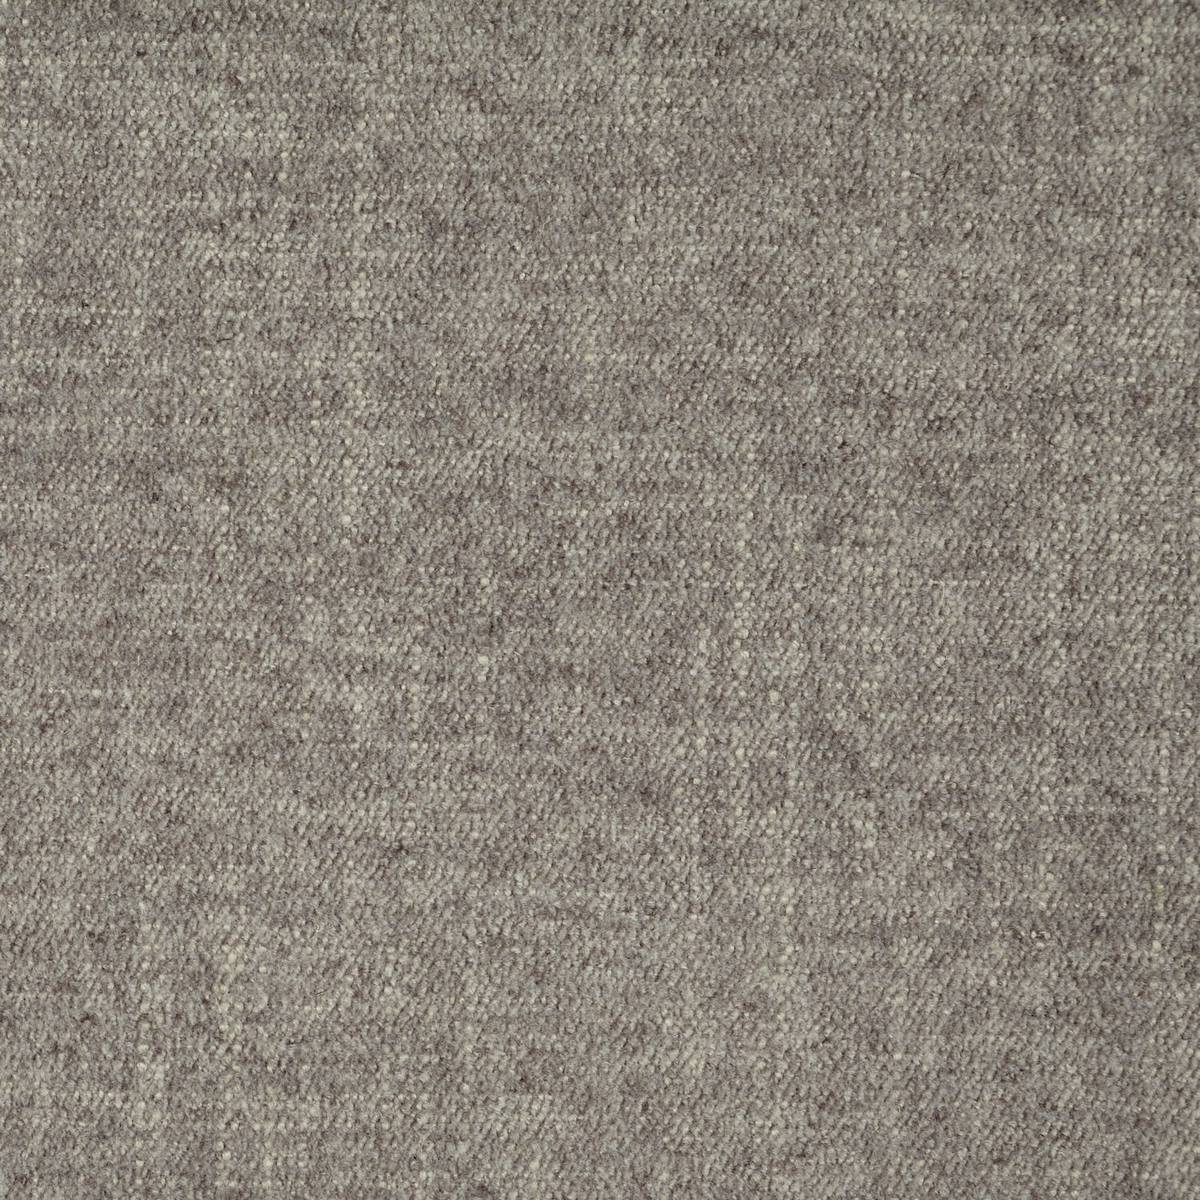 Marly Chenille Cobble Fabric by Harlequin